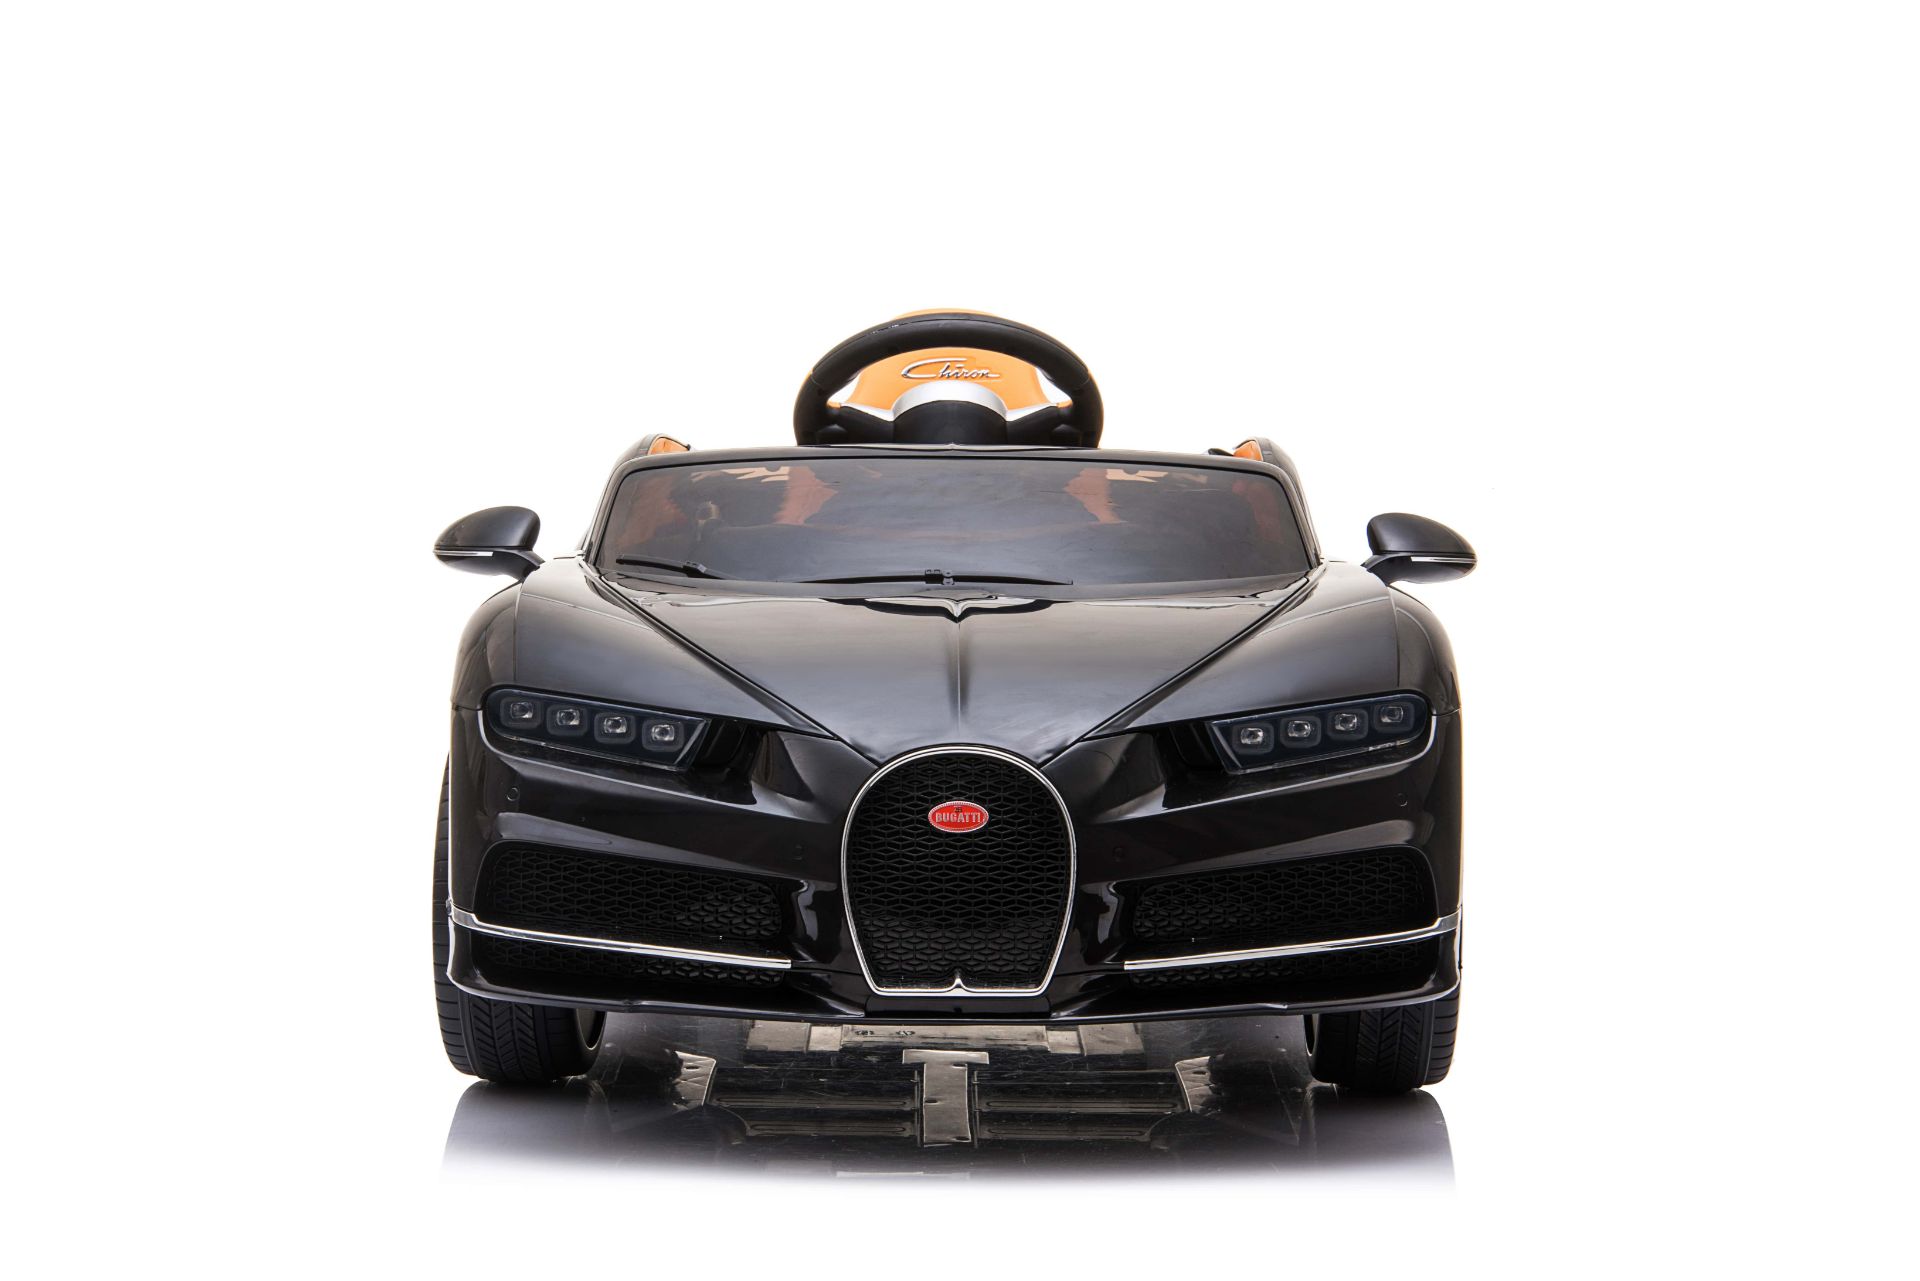 RIDE ON FULLY LICENCED BUGATTI CHIRON 12V WITH PARENTAL REMOTE CONTROL - BLACK - Image 5 of 7